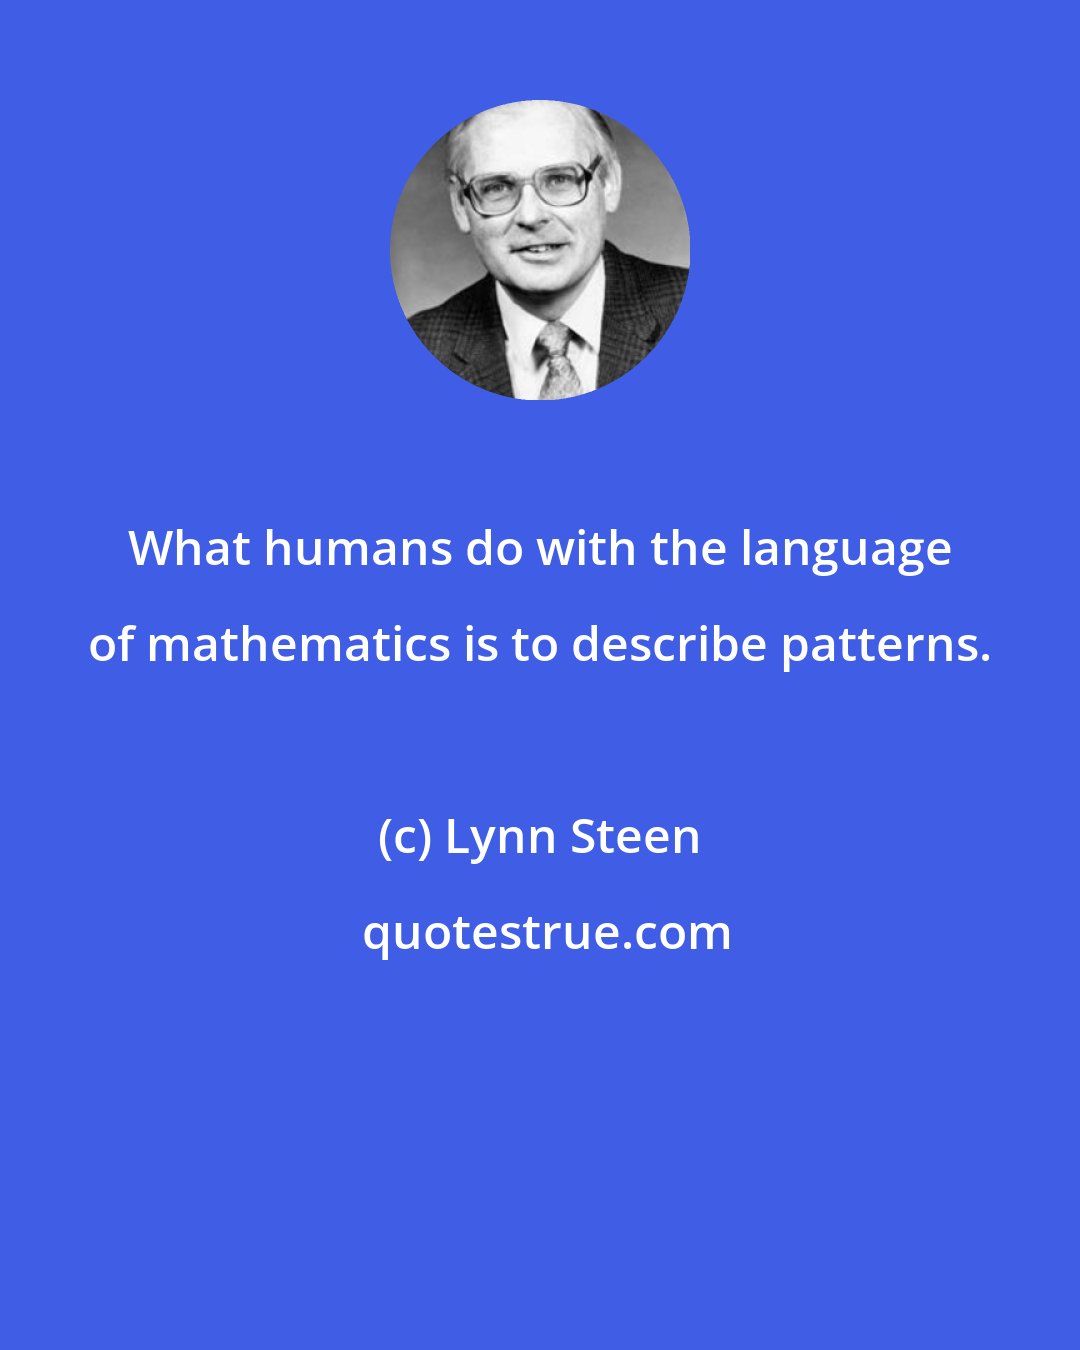 Lynn Steen: What humans do with the language of mathematics is to describe patterns.